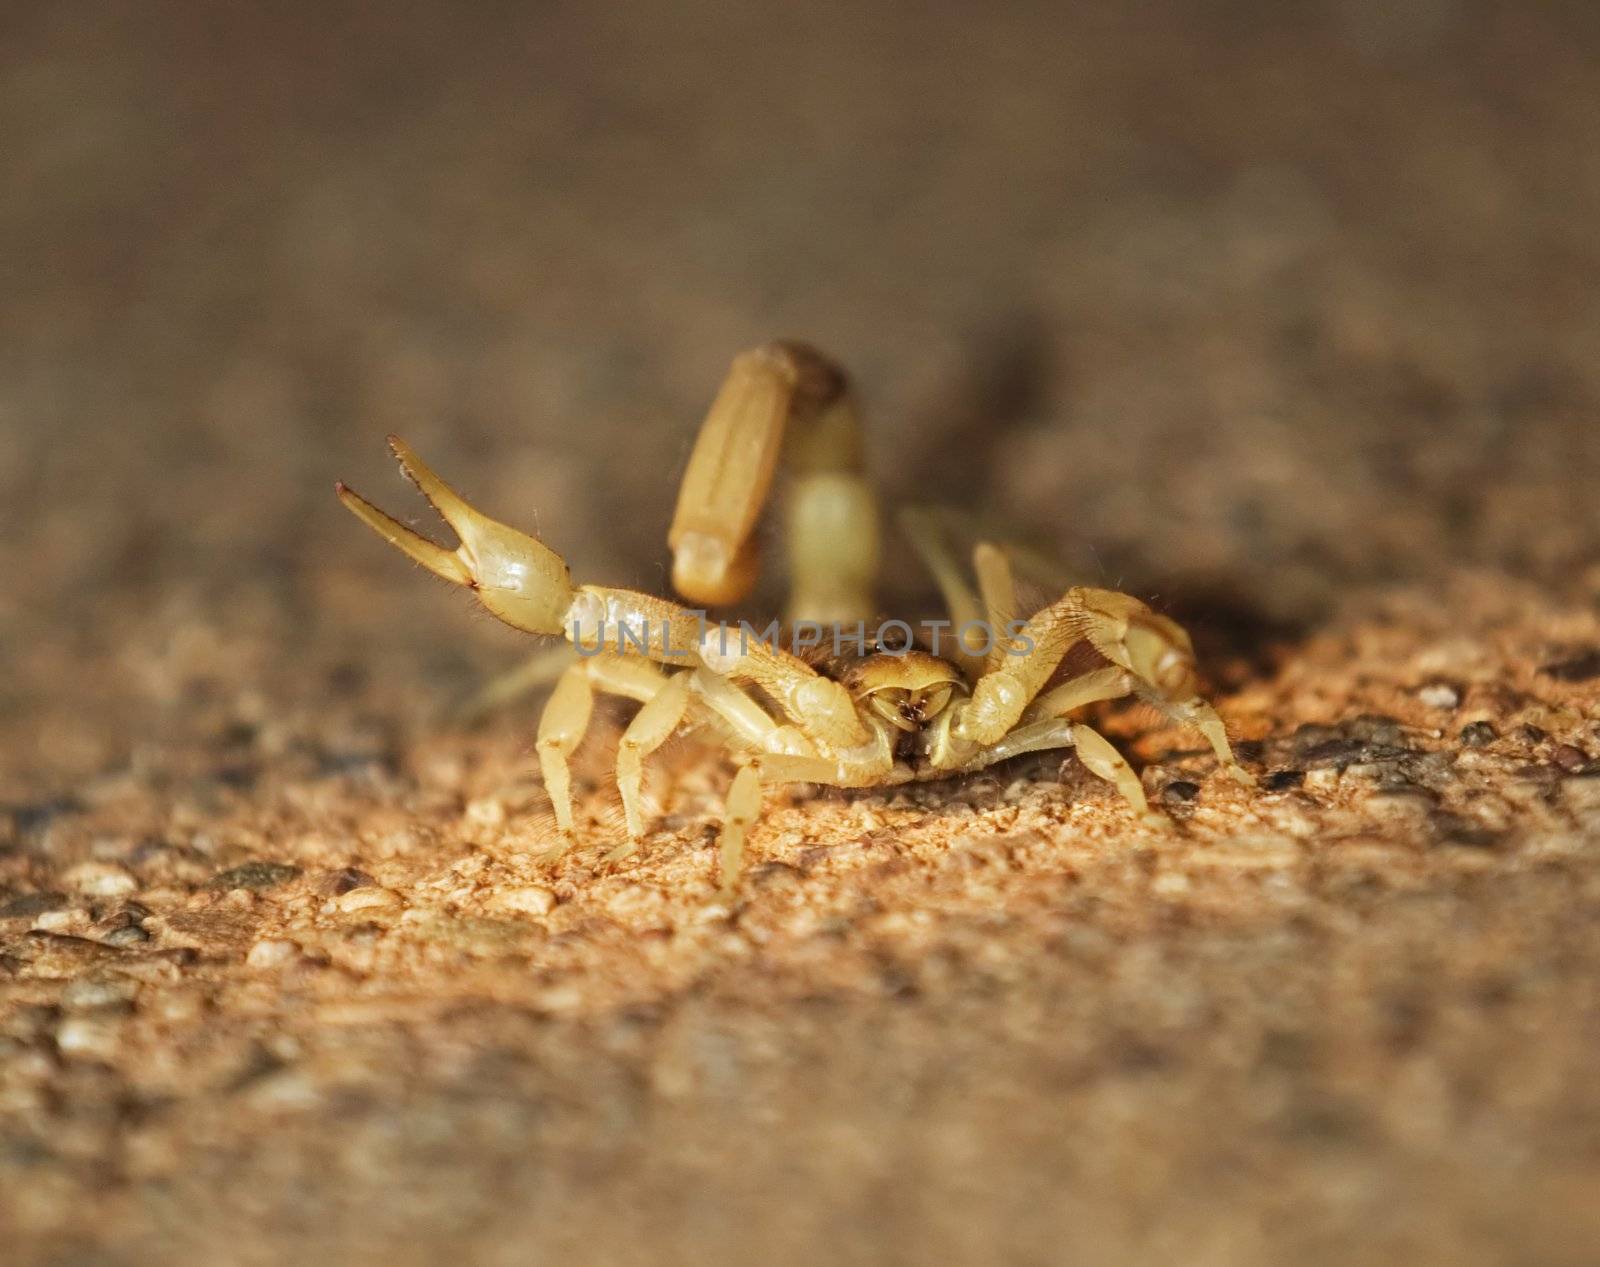 Sonoran Desert Scorpion appears to wave at the camera.